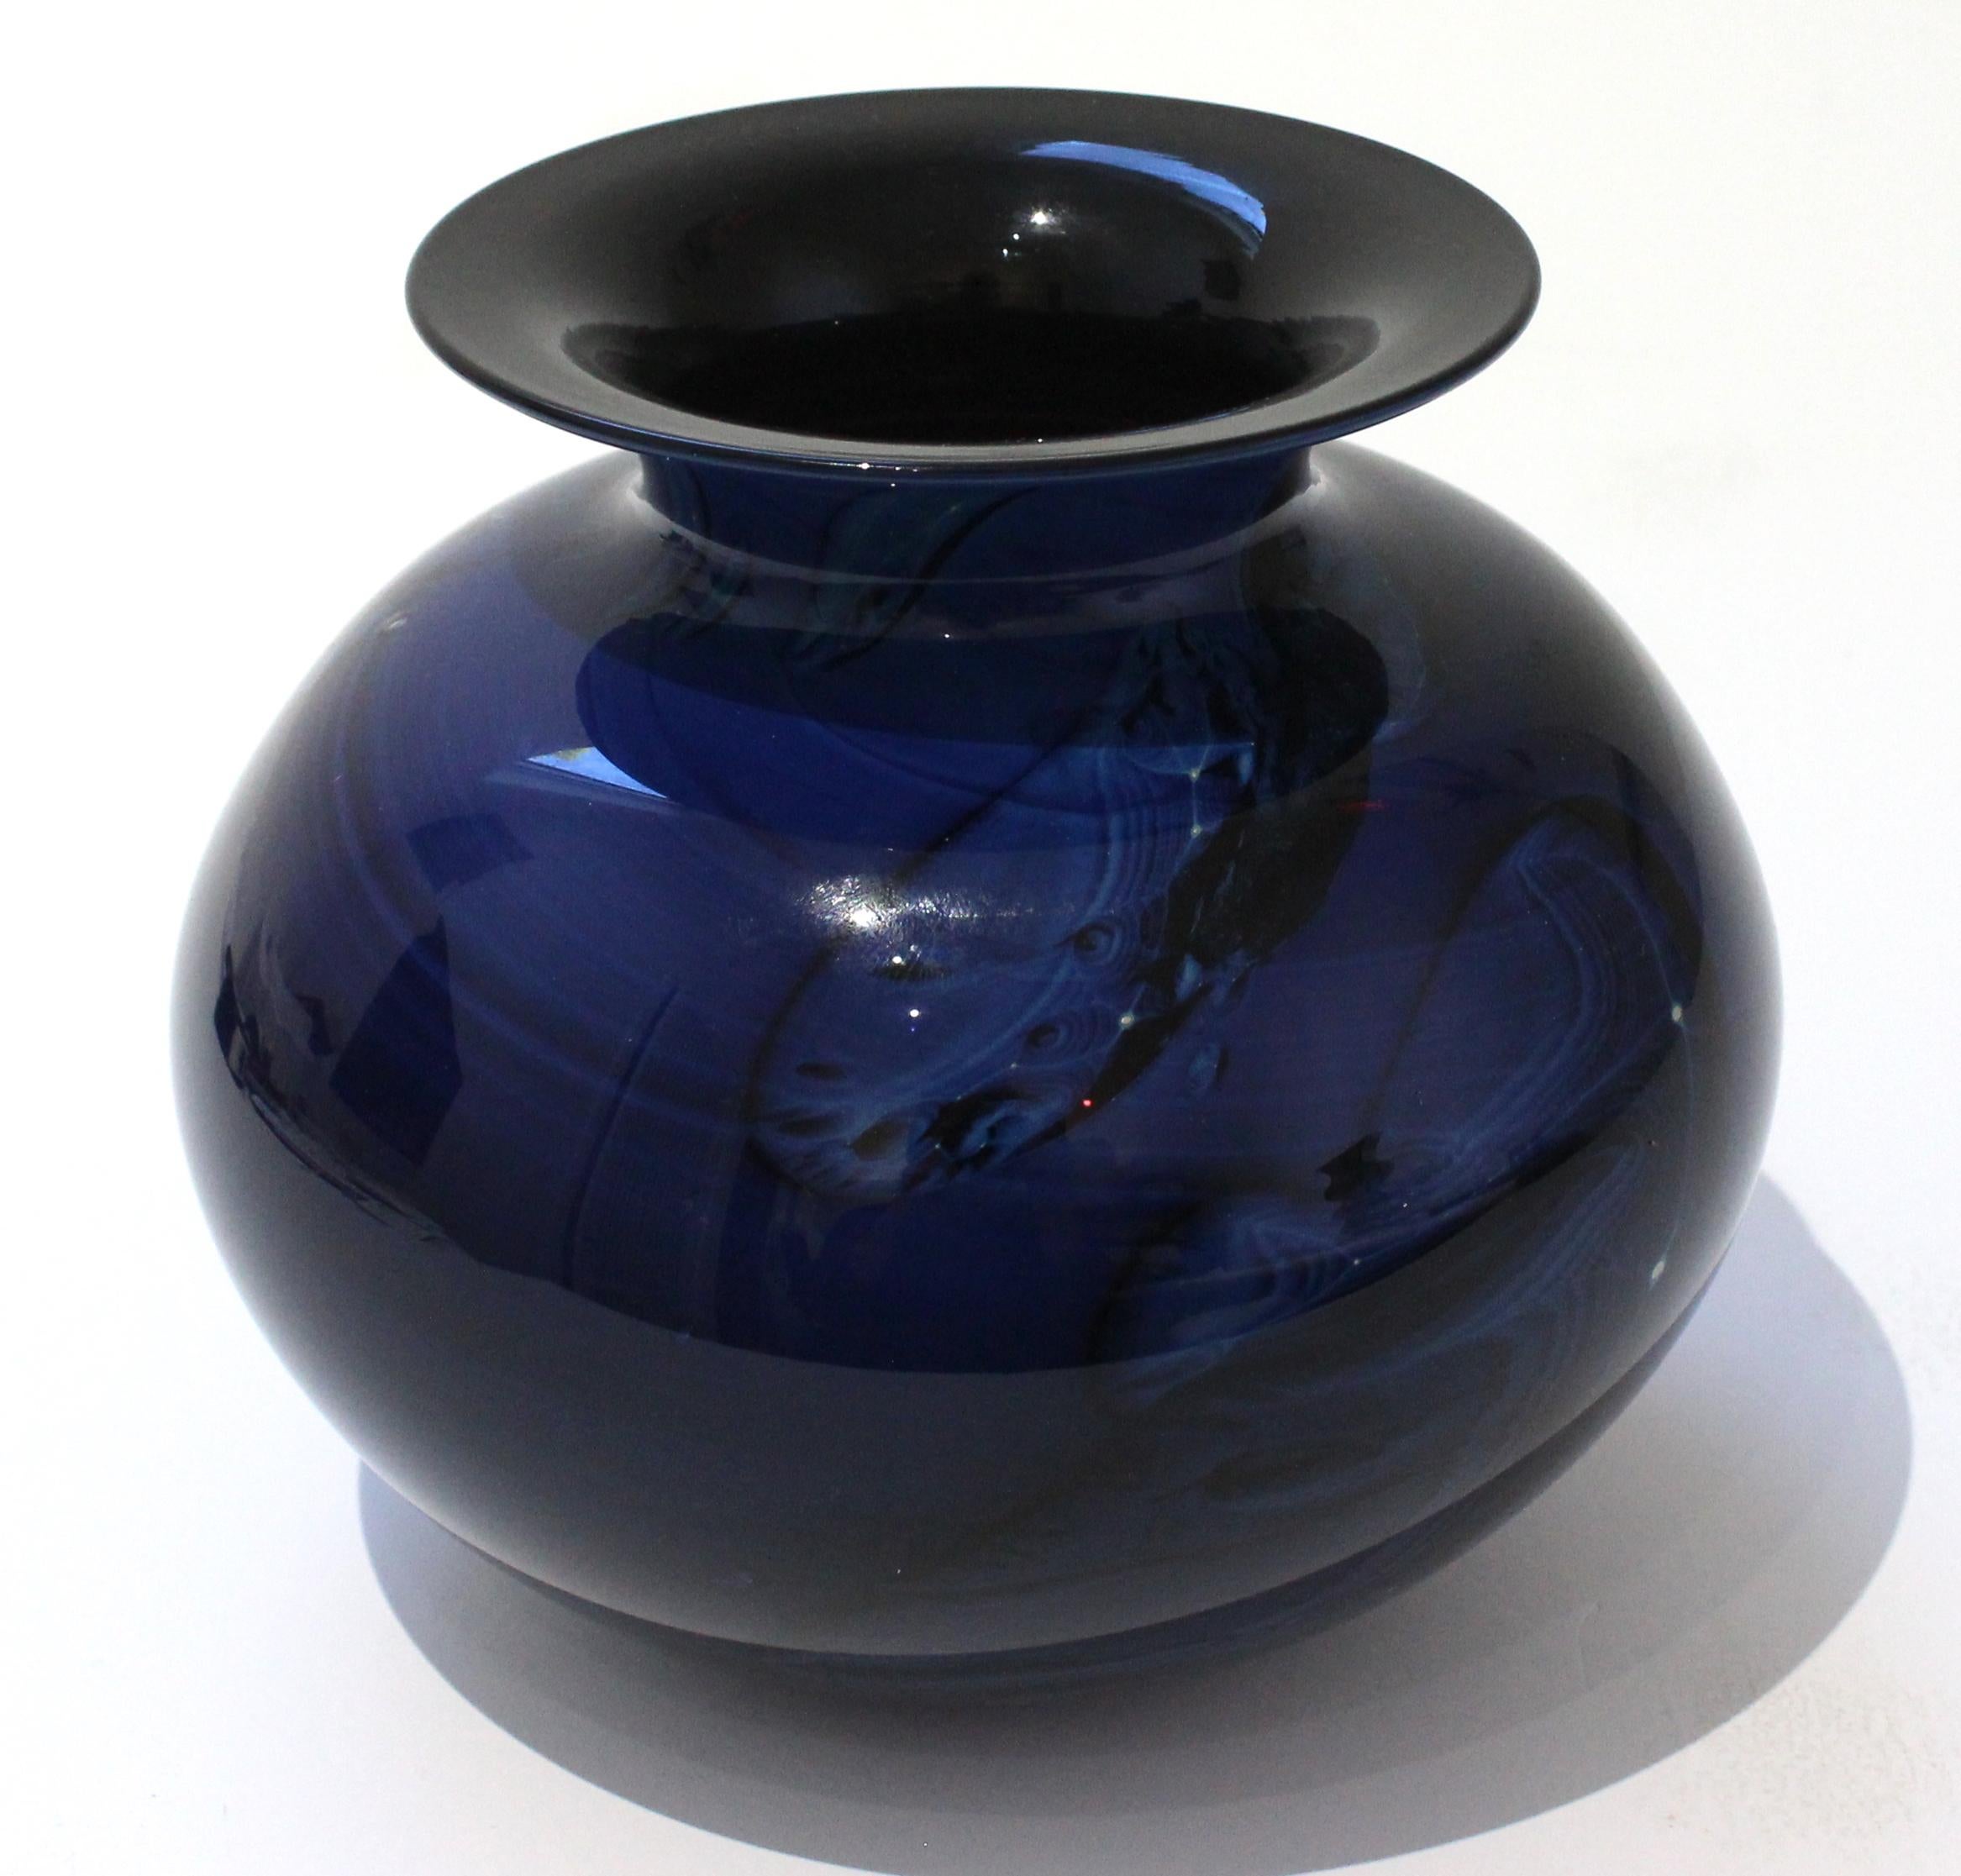 This stylish and chic artisan glass vase dates to 1990 and it will make a subtle statement with its simple form and use of materials. The piece captures a moment in the celestial universe with its coloration and technique.

Note: Title 